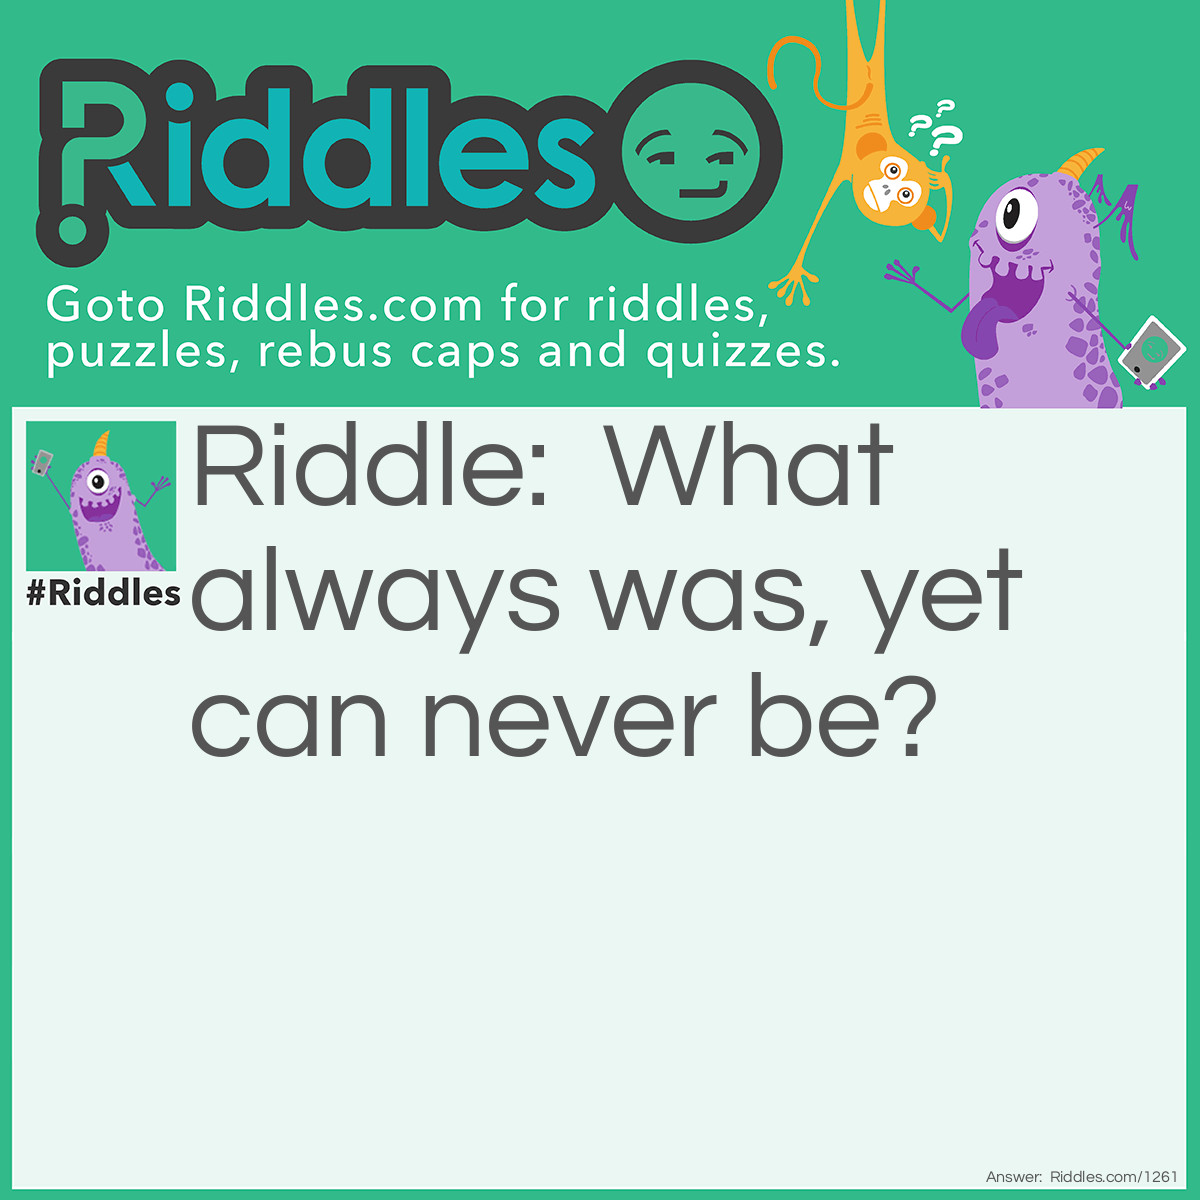 Riddle: What always was, yet can never be? Answer: Yesterday.